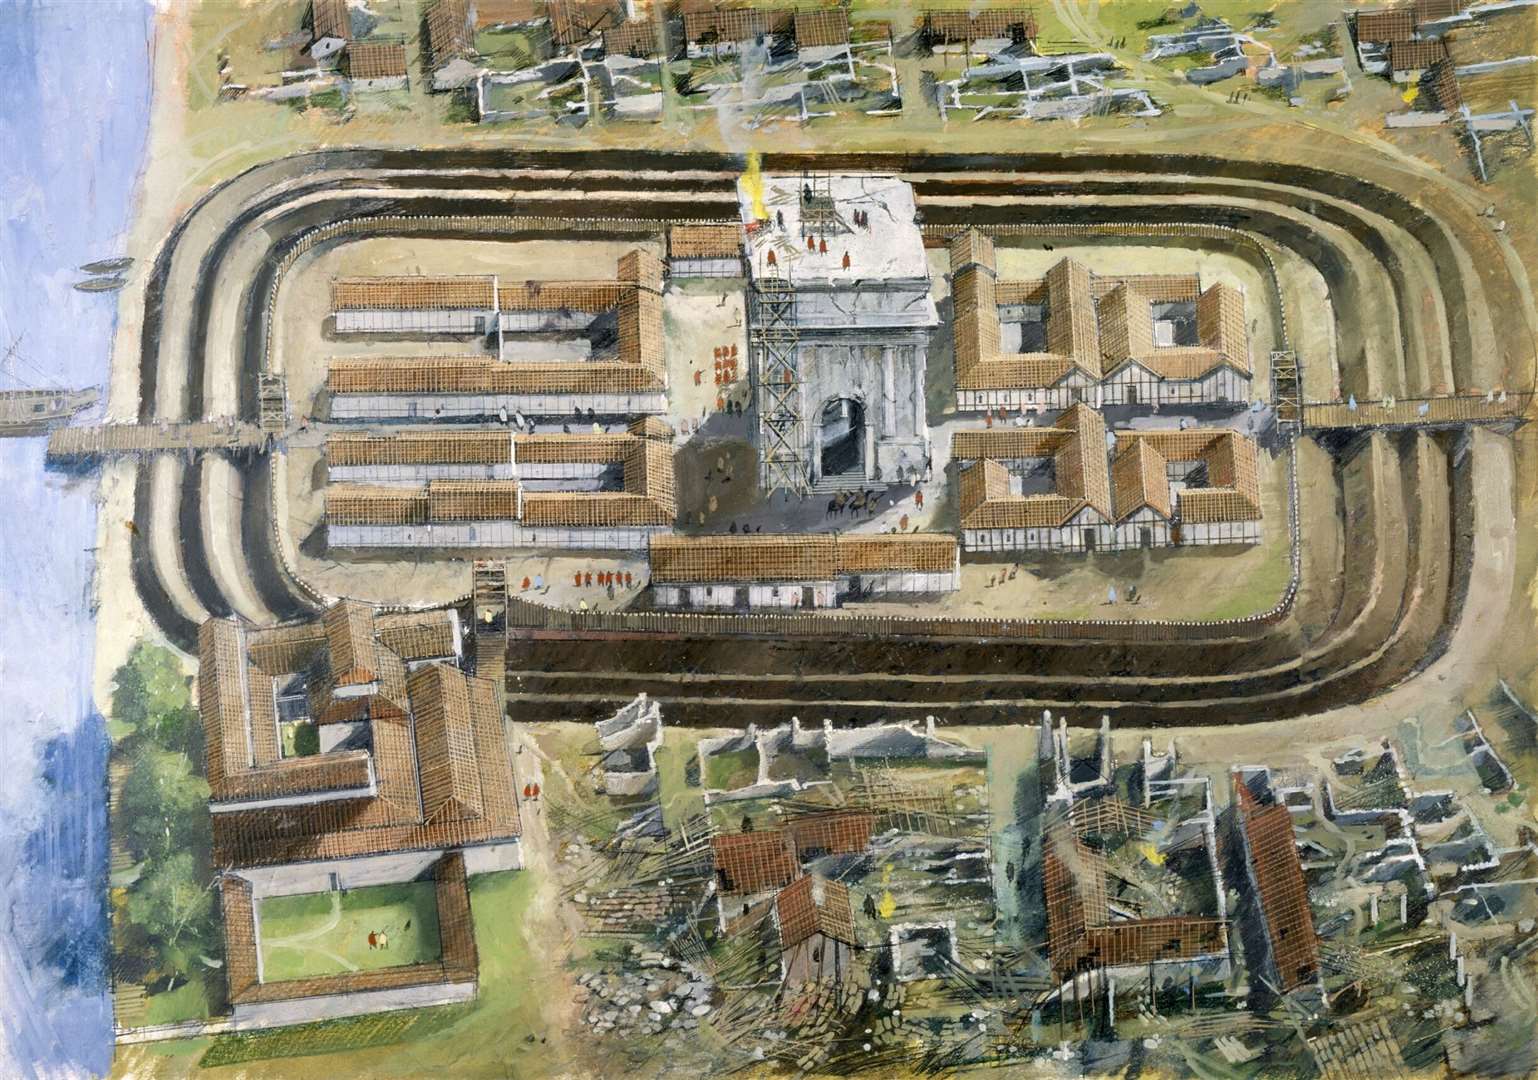 An artist’s impression of Richborough's Roman fort in its hey-day. Kent was strategically important to the occupying Roman forces. Picture: Gill Buttwell